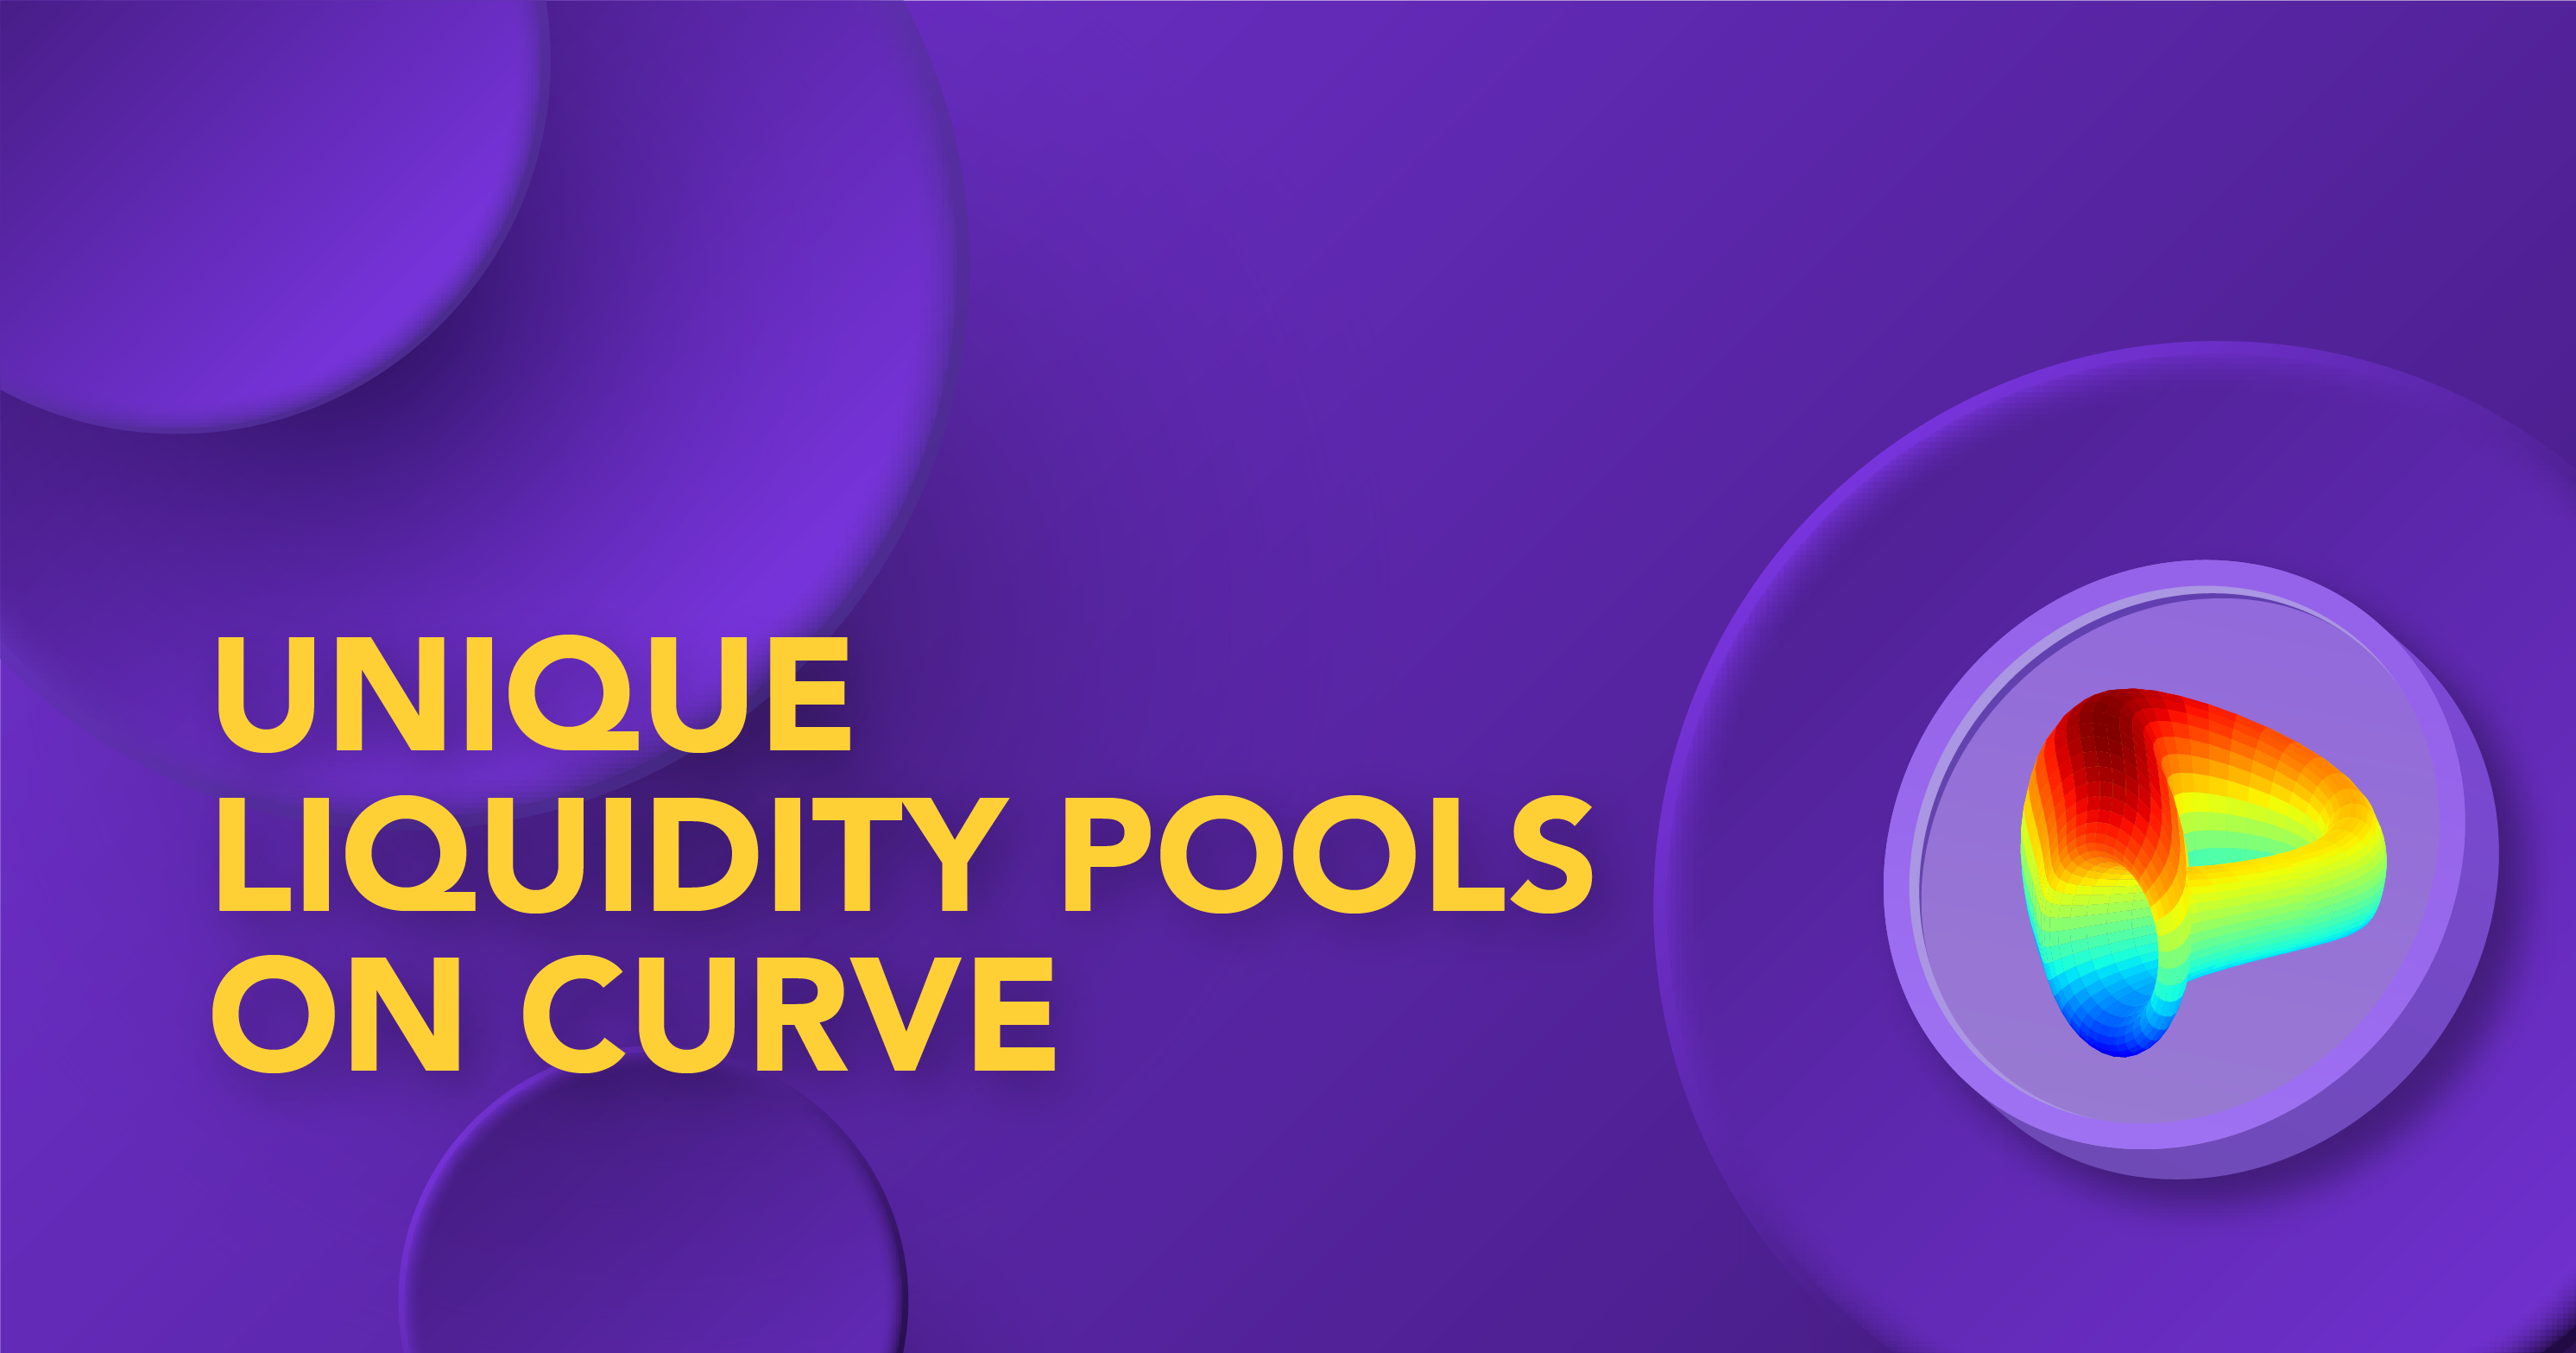 How Curve Factory Contracts Streamline Liquidity Pool Deployment, by  Wen-Chiao Su